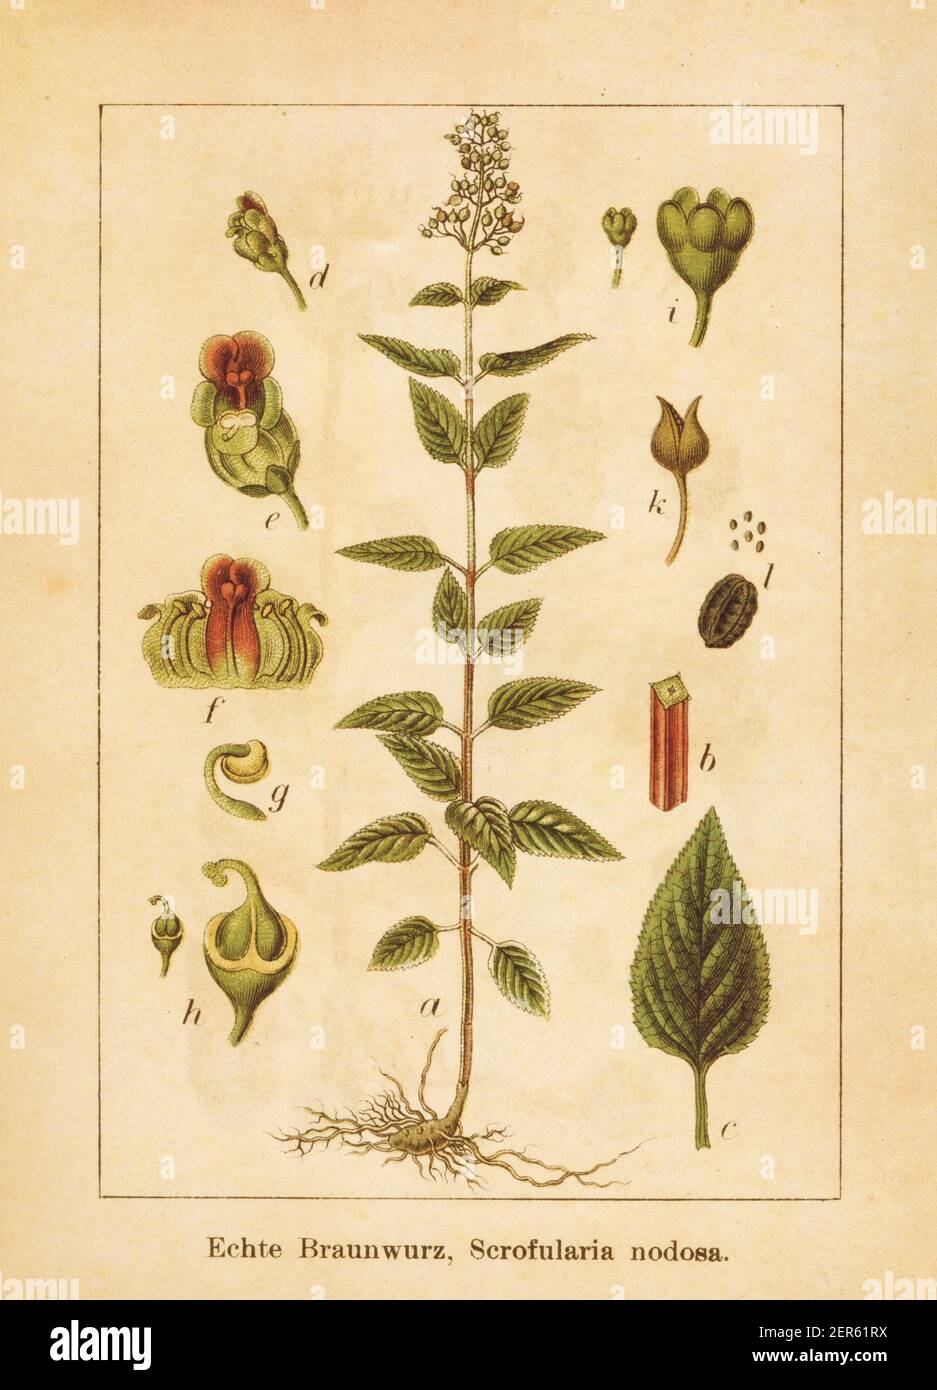 Antique illustration of a scrophularia nodosa, also known as woodland figwort, common figwort or figwort. Engraved by Jacob Sturm (1771-1848) and publ Stock Photo